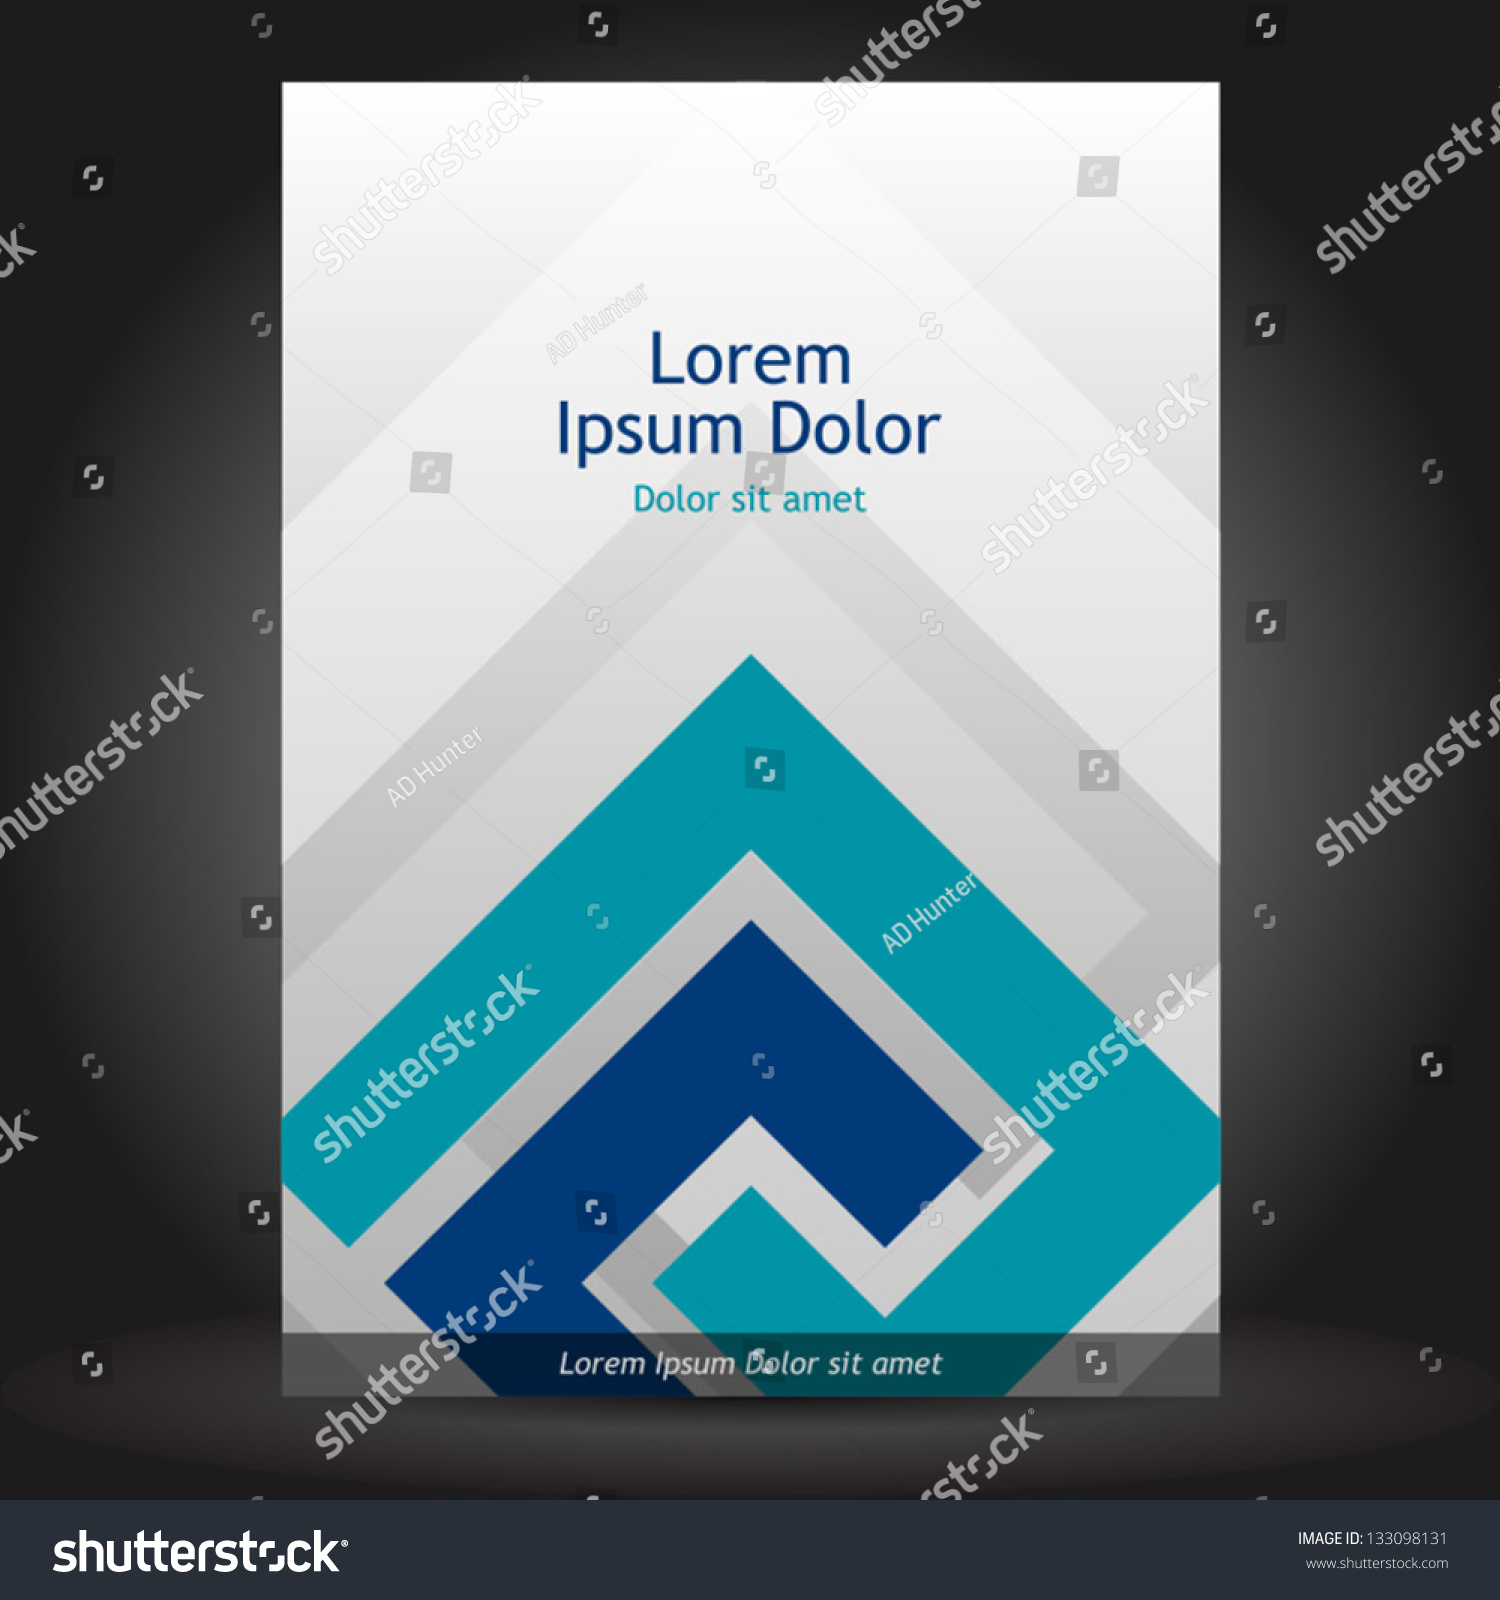 Vector Gray Brochure Cover Design With Blue Elements. Eps 10 ...